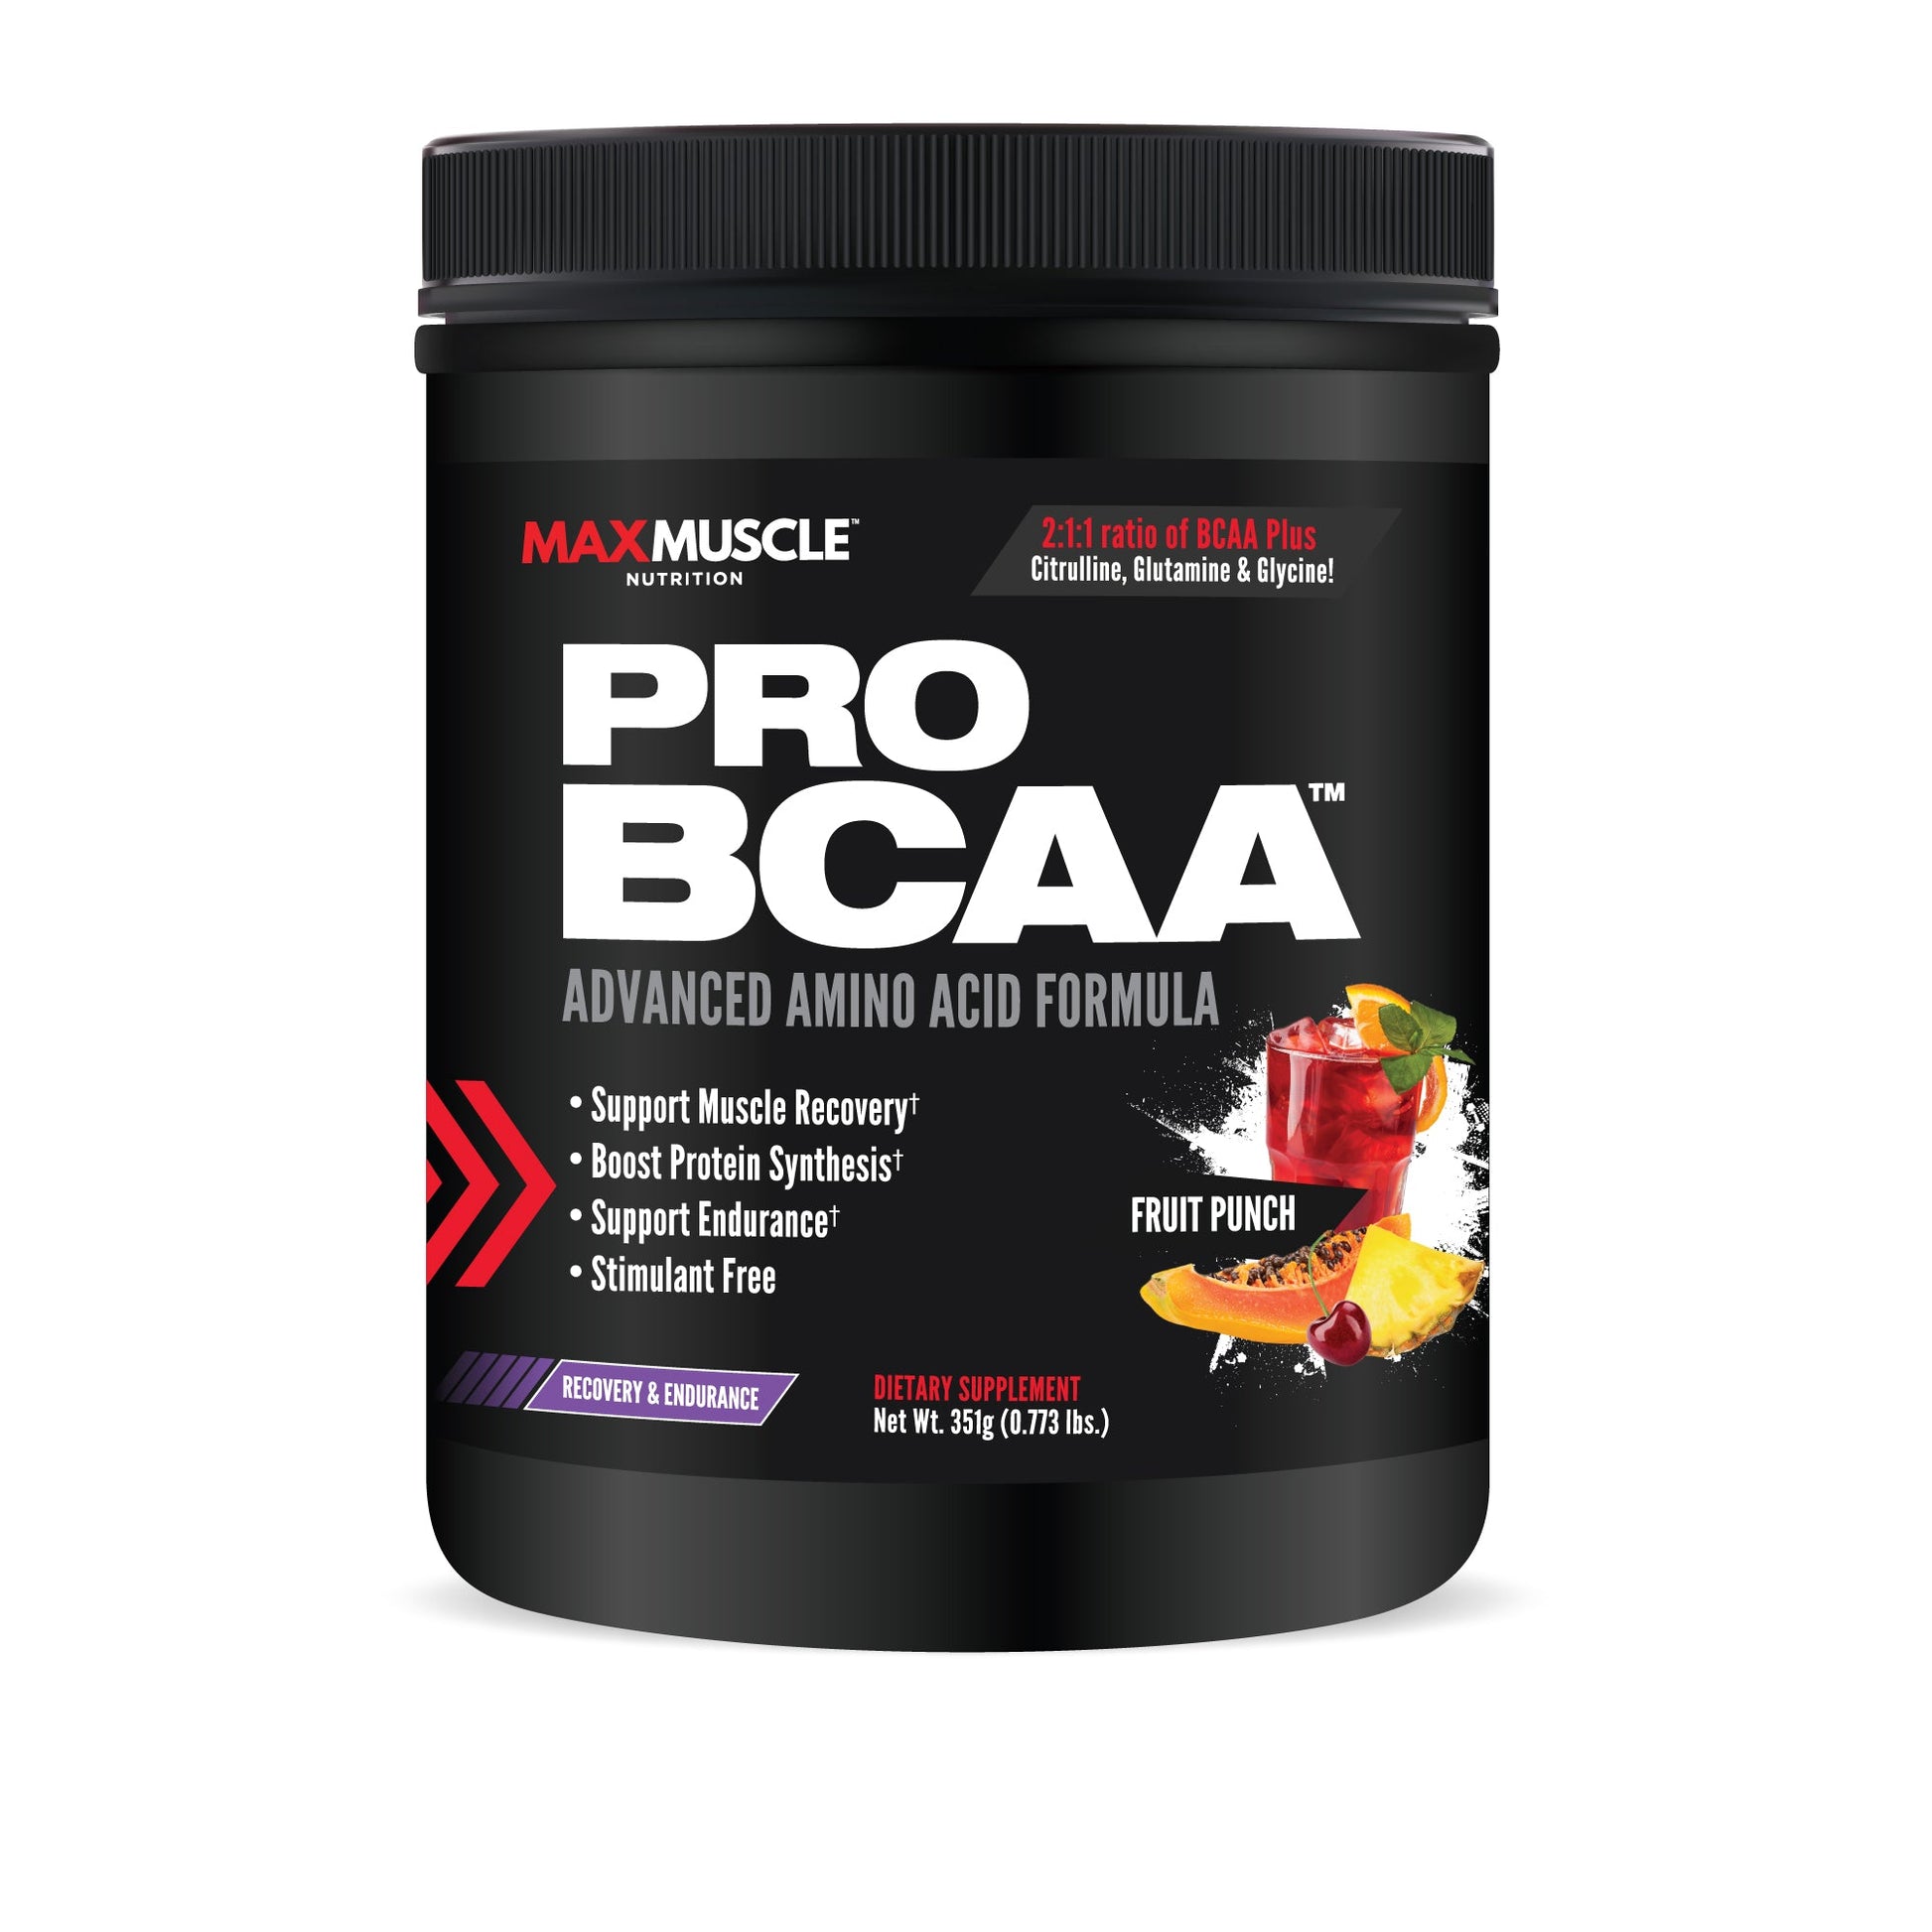 PRO BCAA Buy1 Get 1 50% Off Max Muscle Orlando